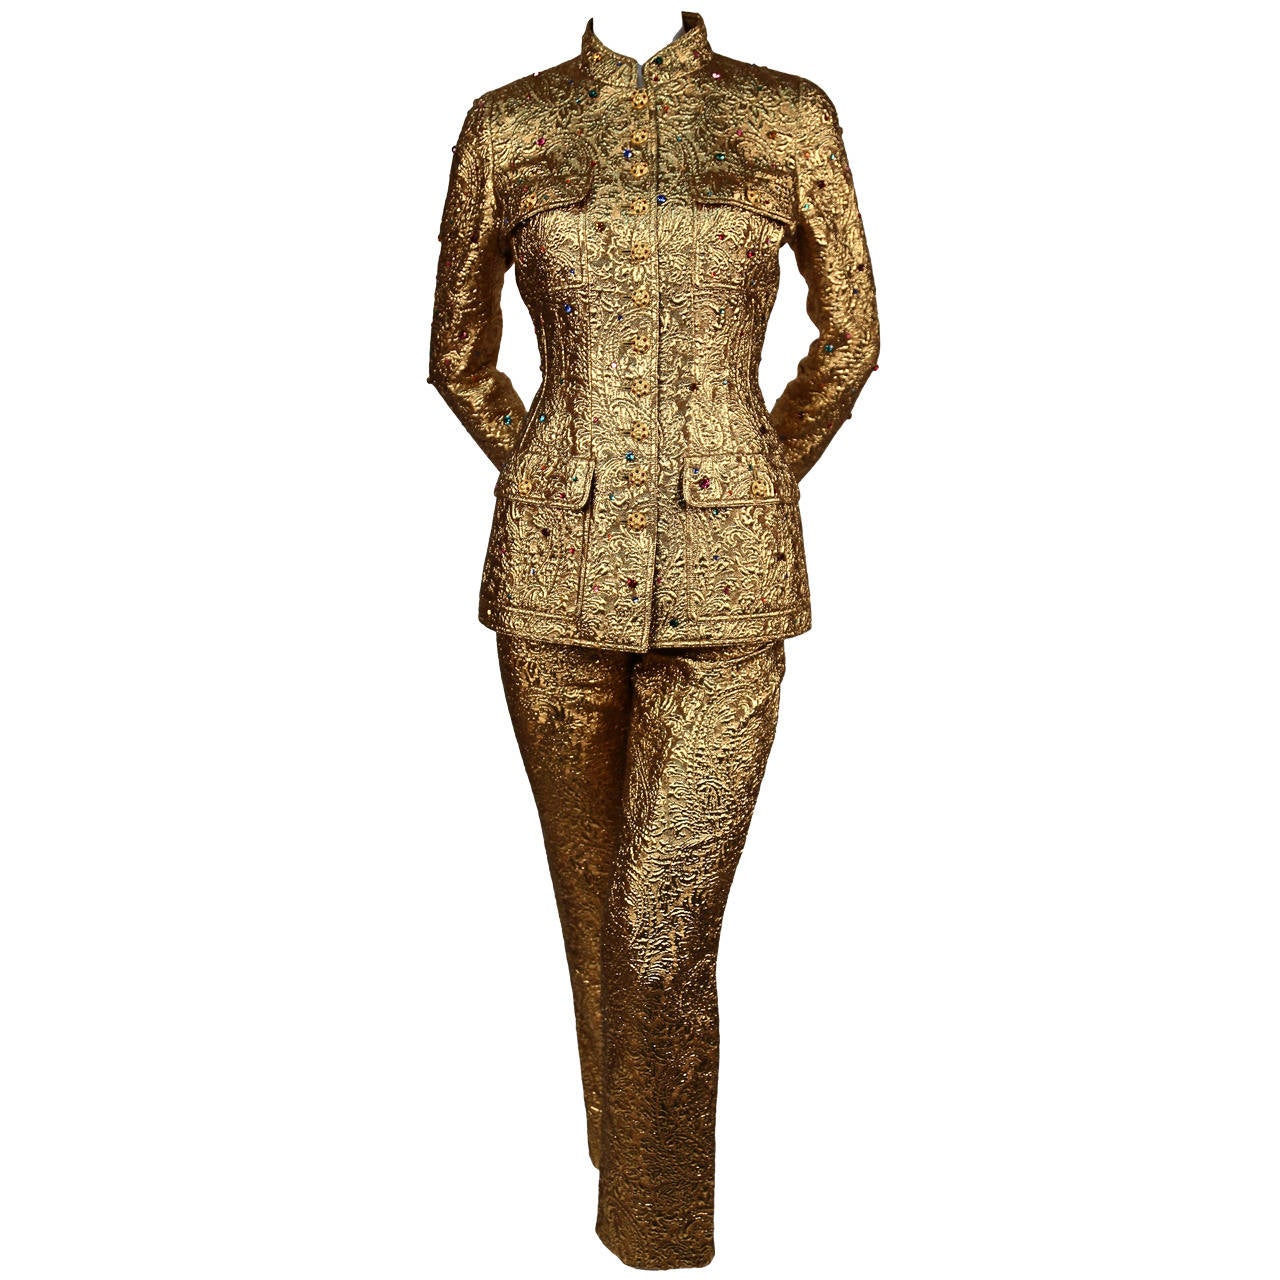 Rare 1996 CHANEL metallic gold suit with colored rhinestones & Gripoix buttons